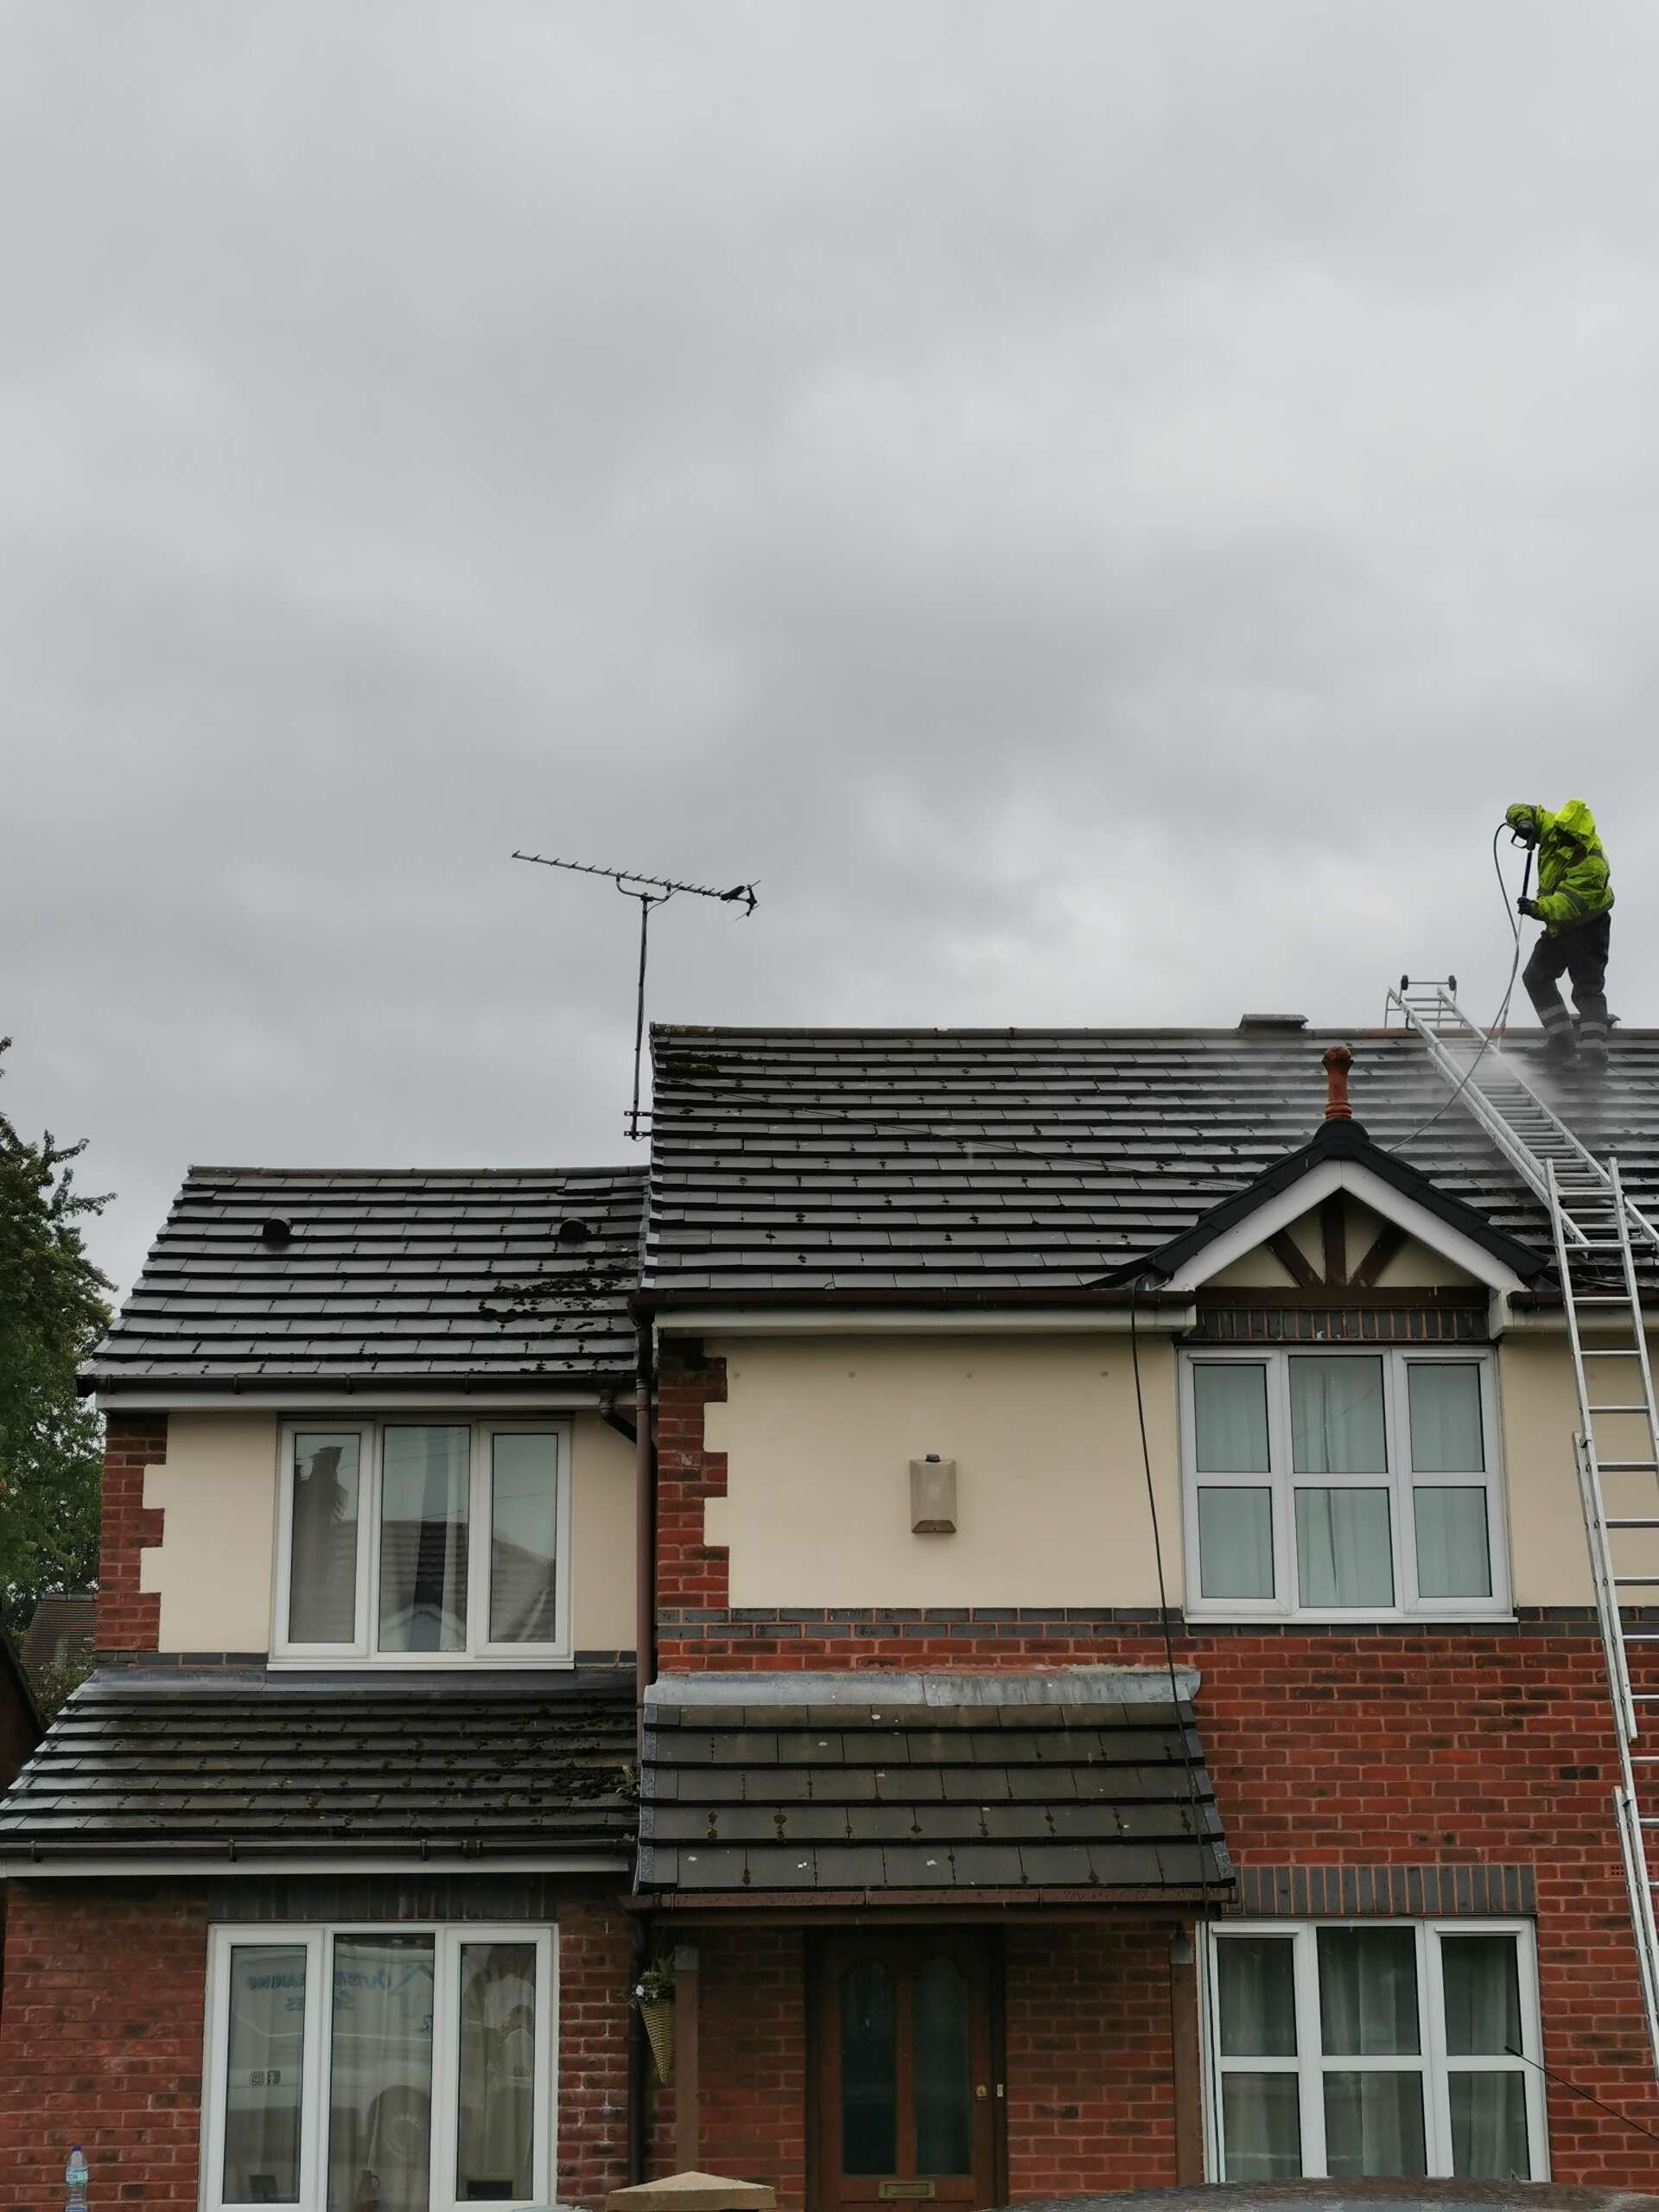 Cheap And Professional Outside Cleaning Services, Roof Cleaning Services, UPVC, Fascias, Soffits & Gutters, Driveways, Paths and Patios Cleaning, About Outside Cleaning Services, outside cleaning services, methods to keep exteriors clean in winter, winter